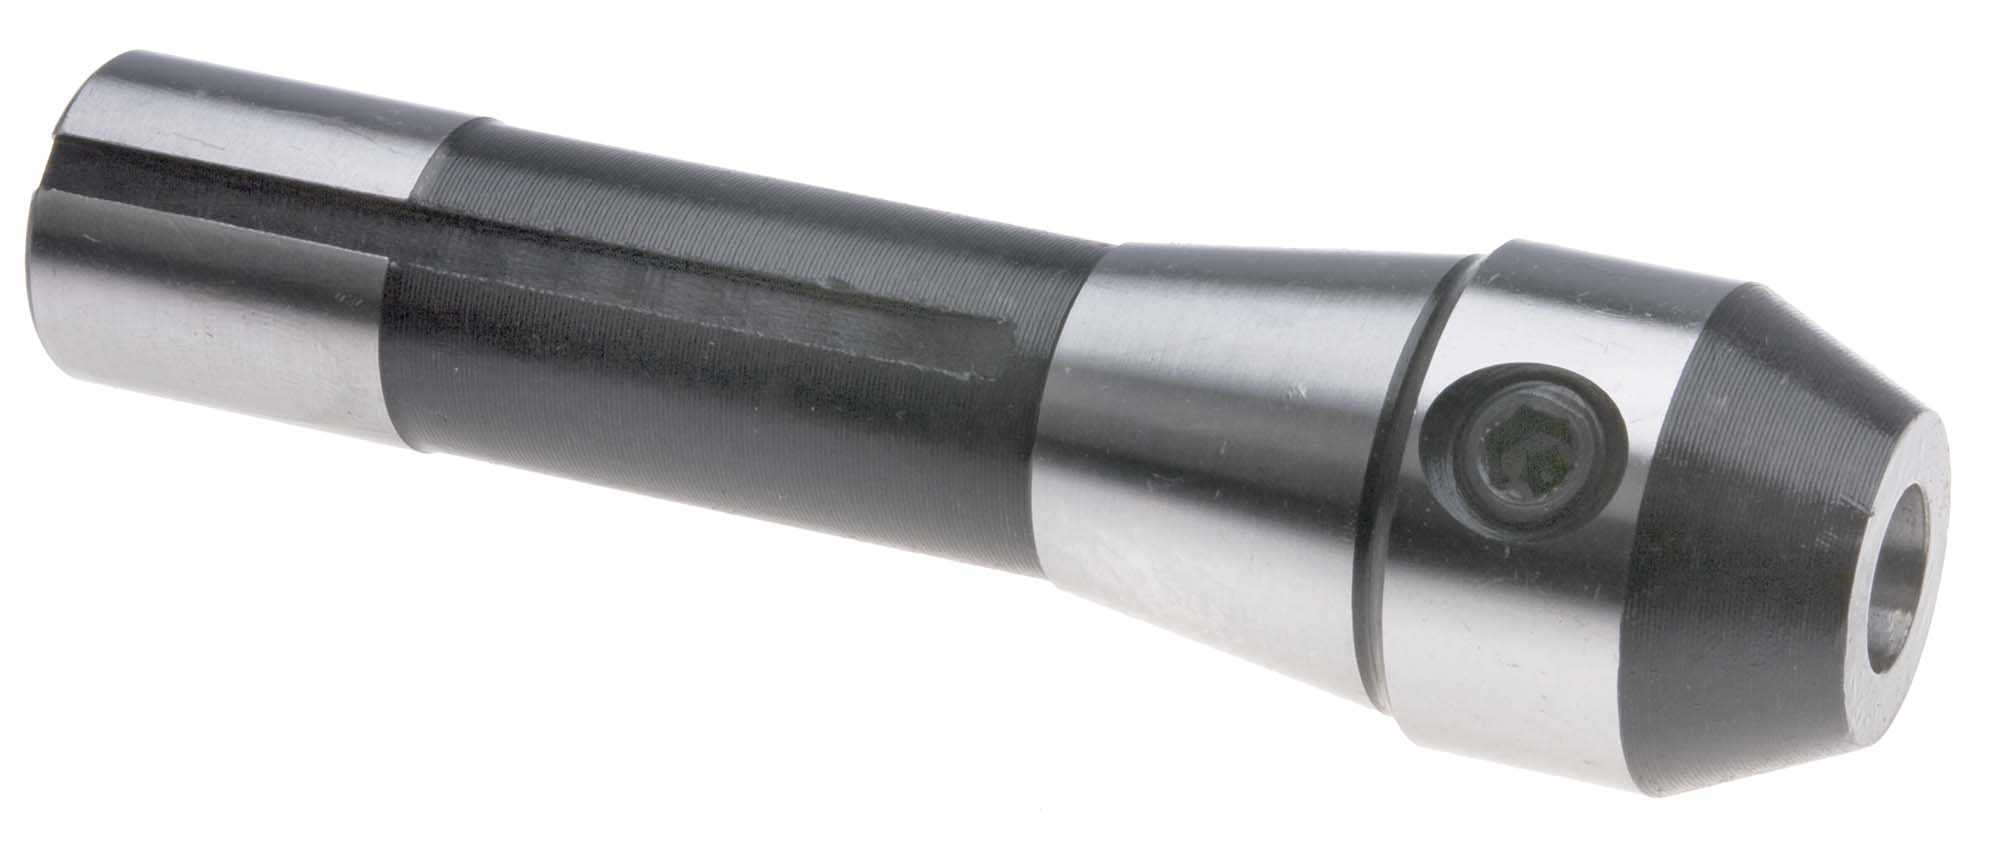 7/8" R8 End Mill Adapter